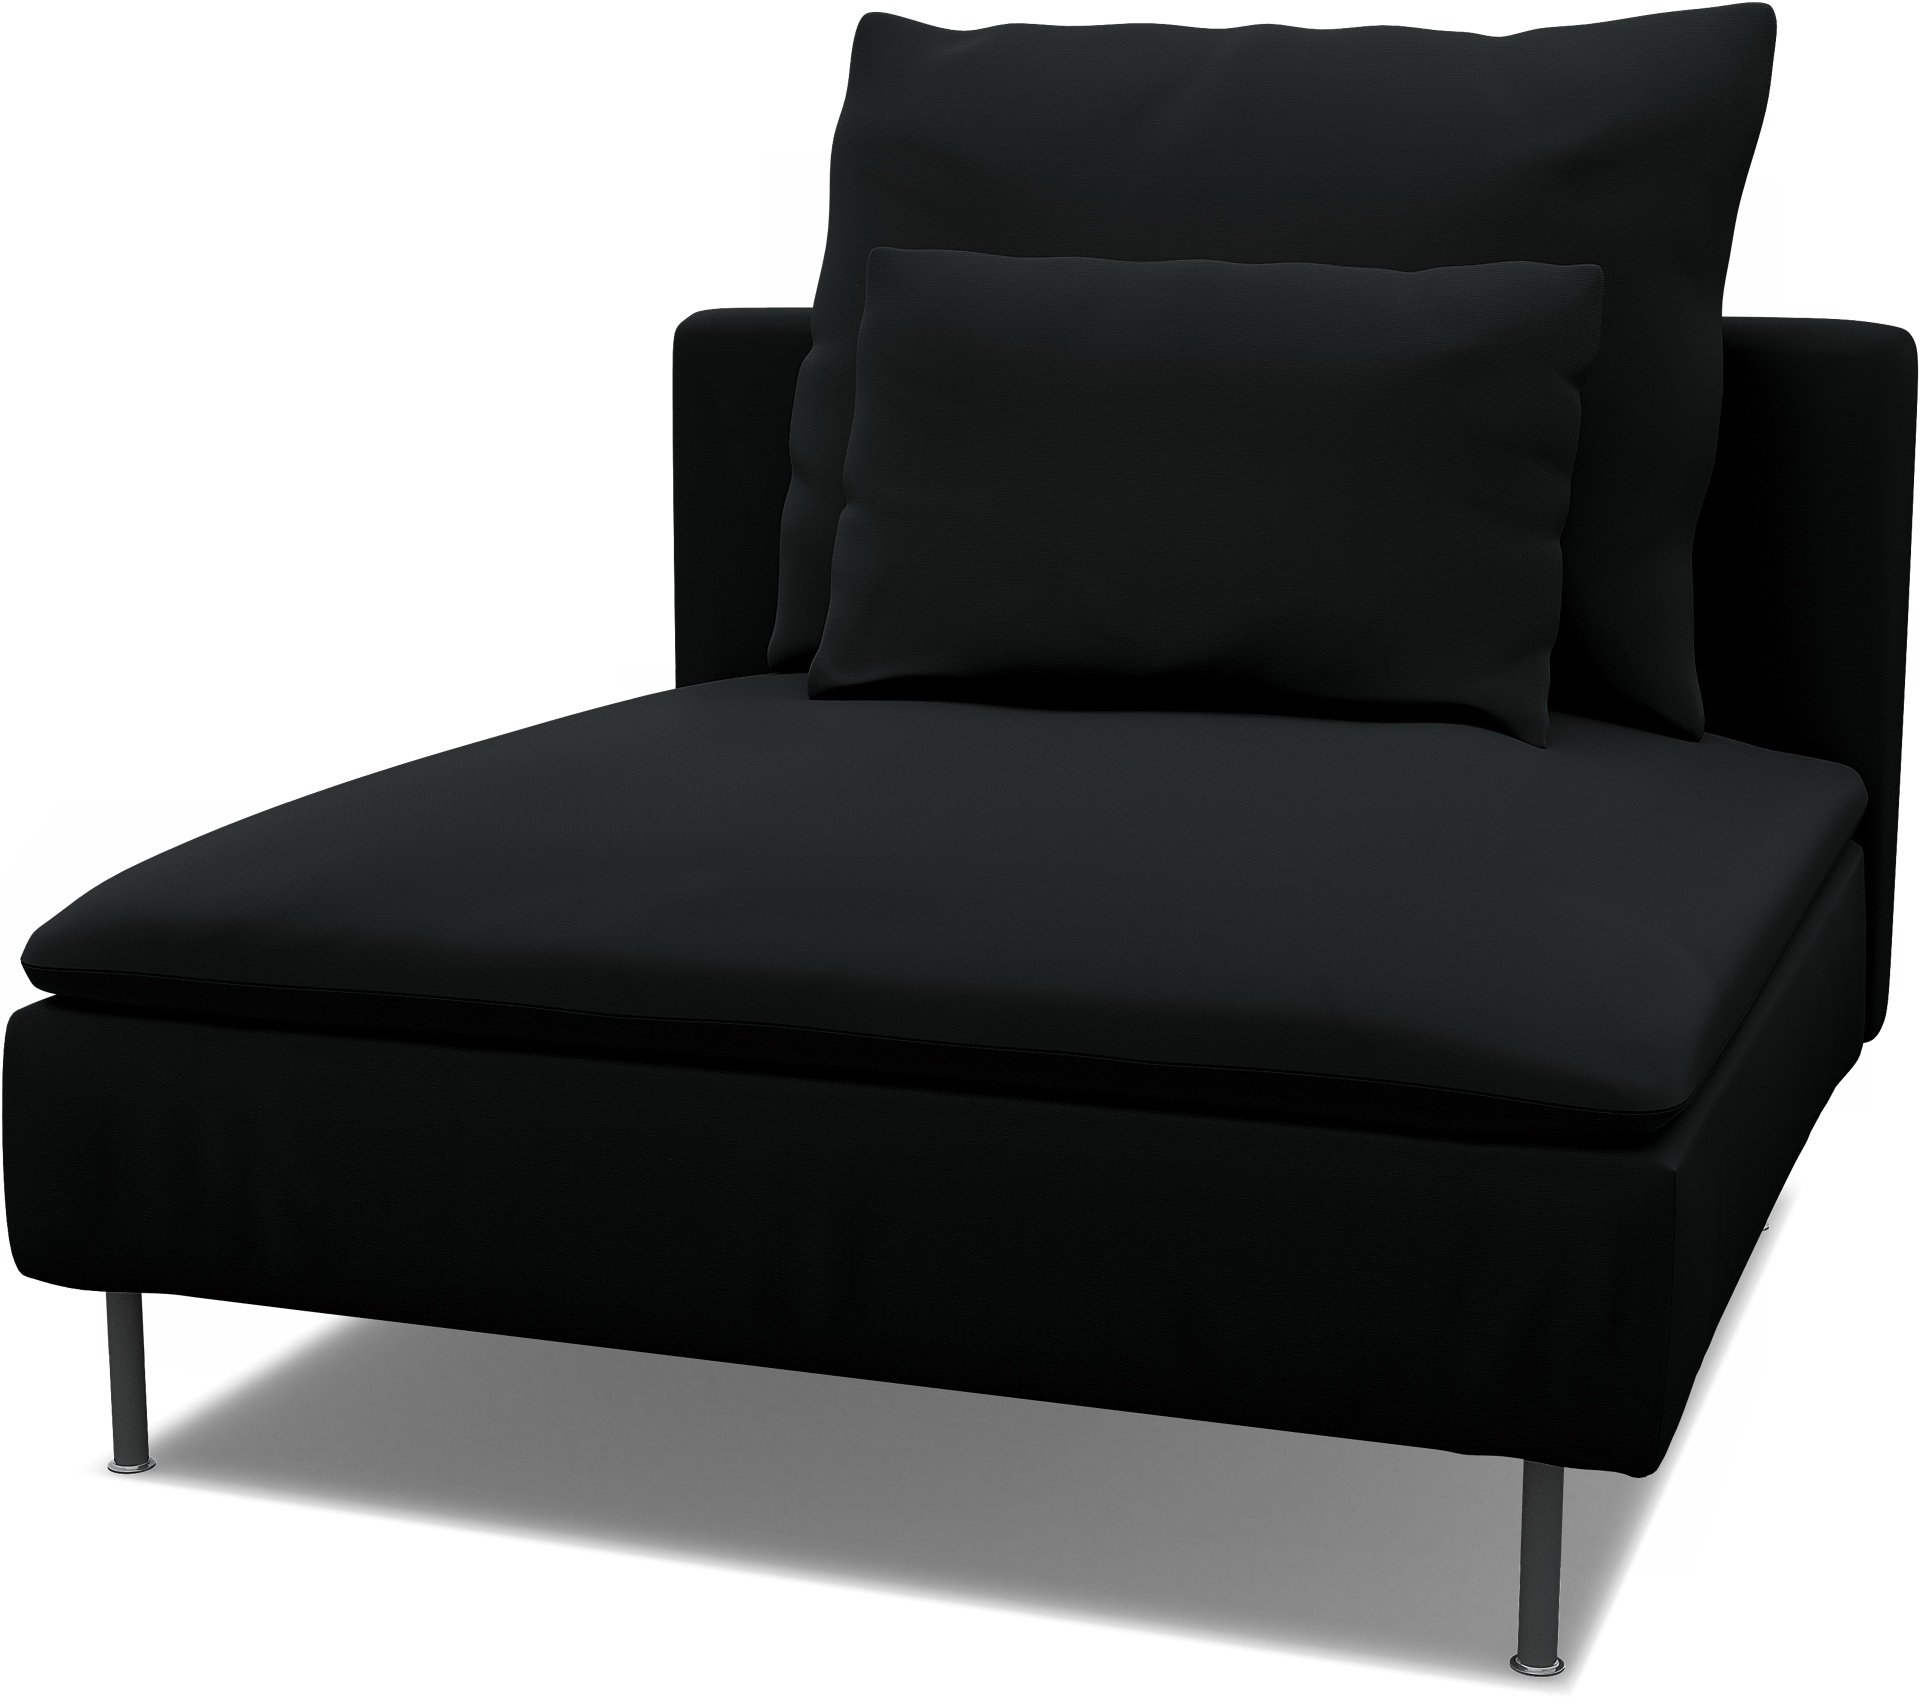 Spare seat cushion cover for SODERHAMN 1 SEAT SECTION , Jet Black, Cotton - Bemz